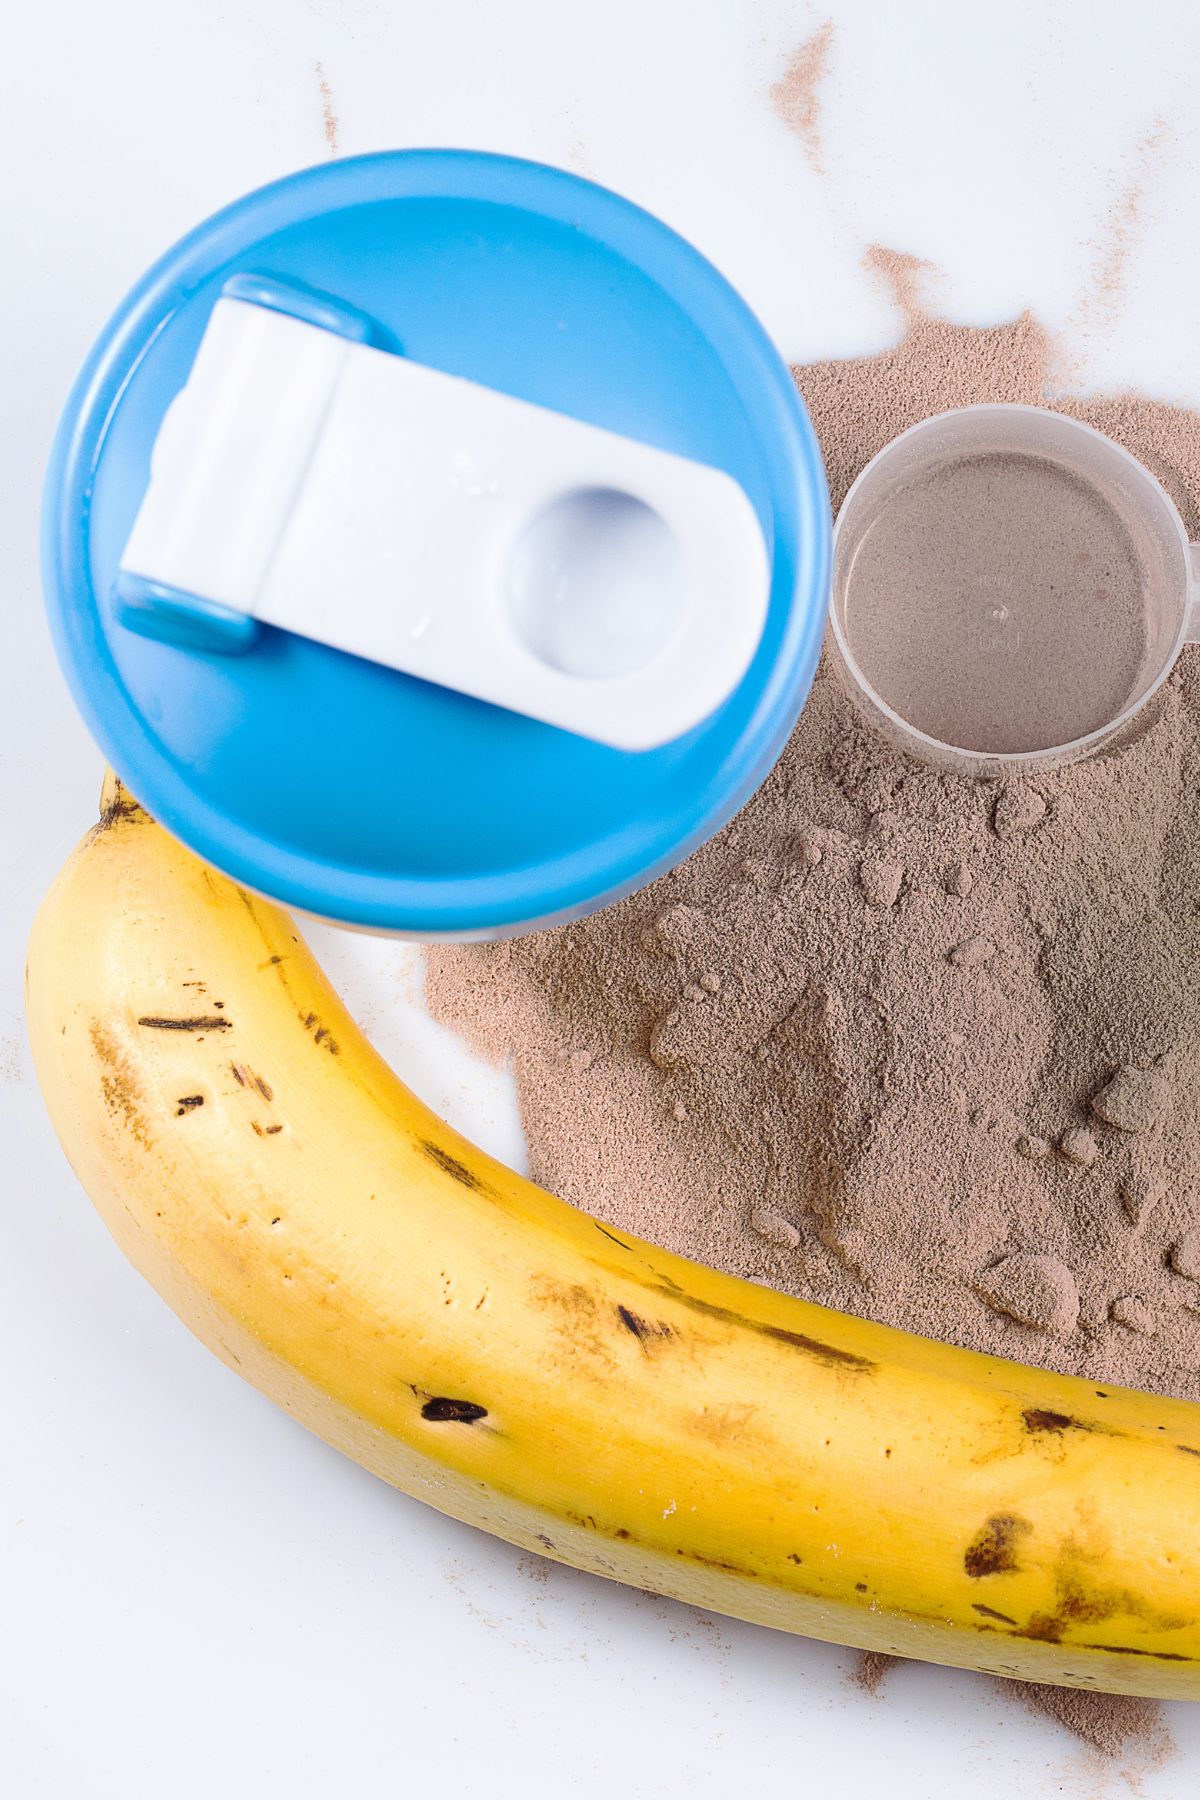 Chocolate protein powder next to a ripe banana and bottle with blue and white cap.